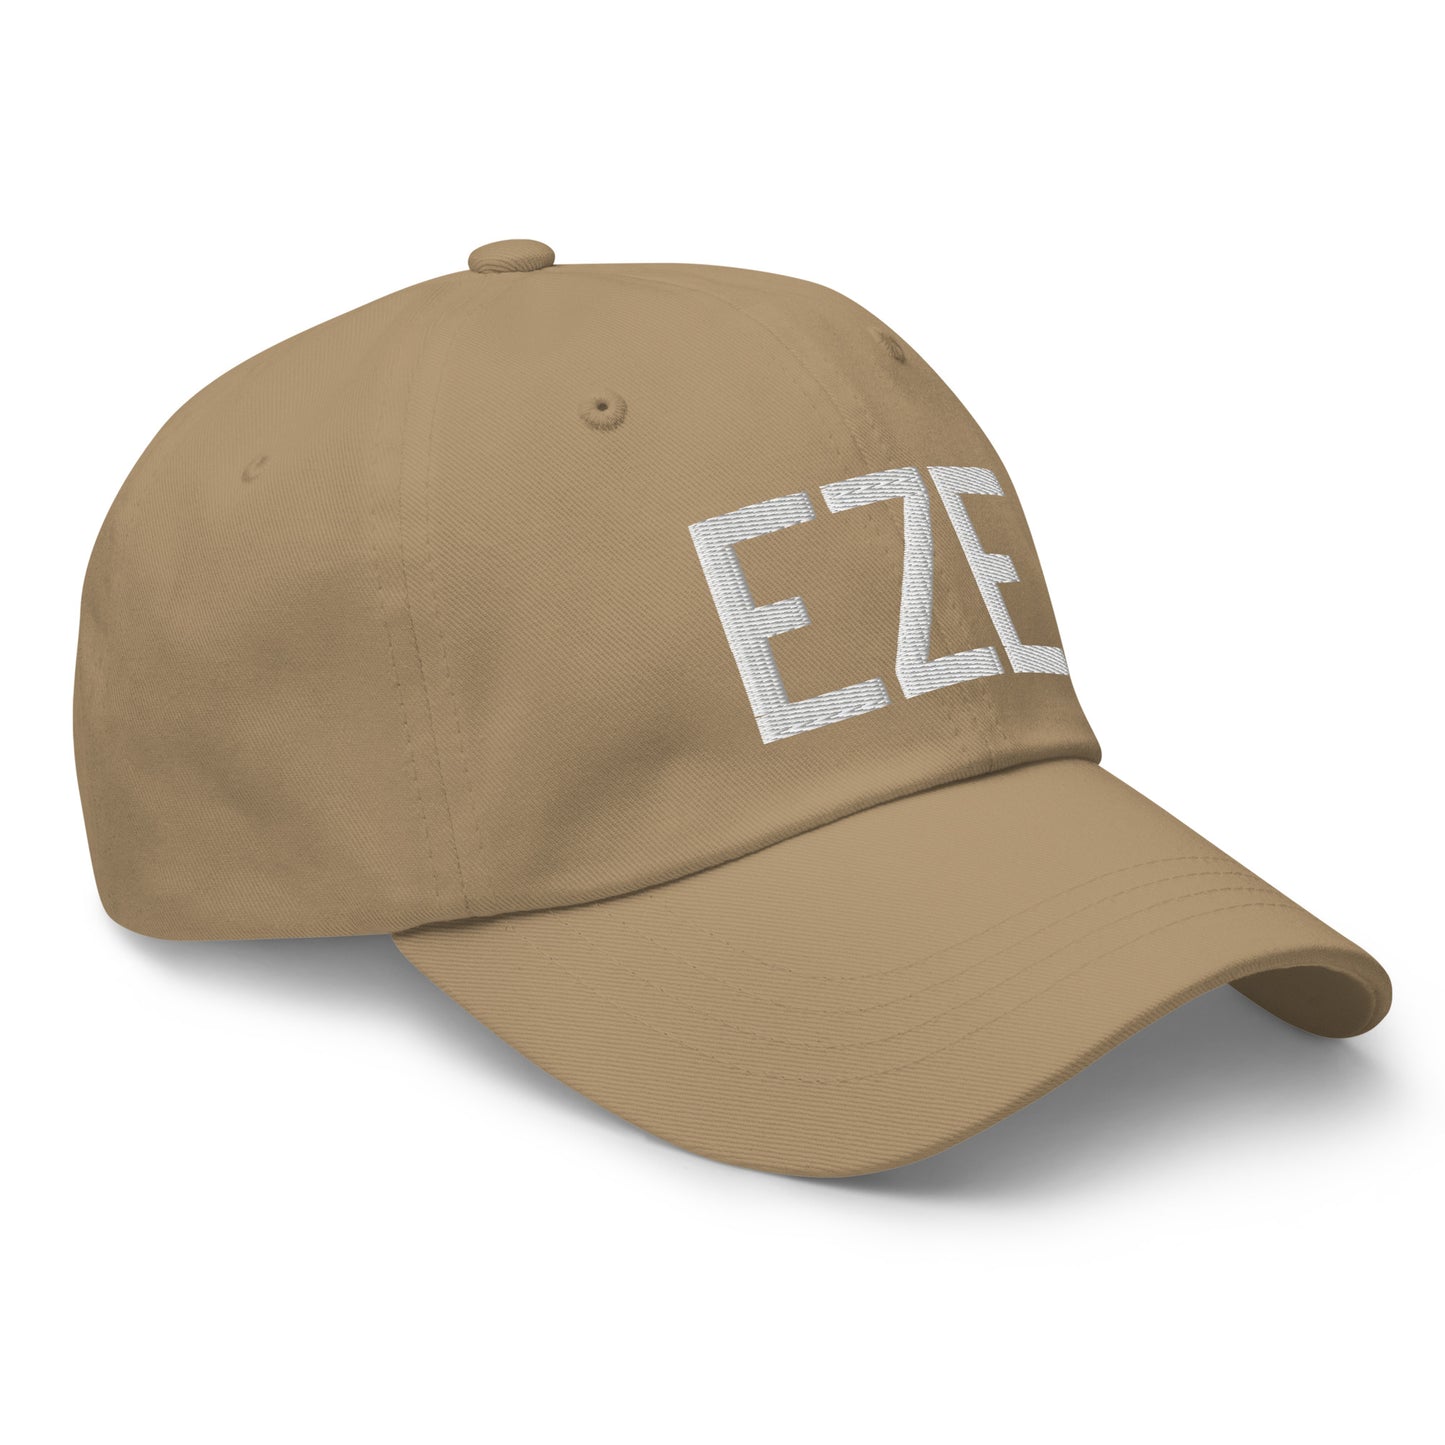 Airport Code Baseball Cap - White • EZE Buenos Aires • YHM Designs - Image 23